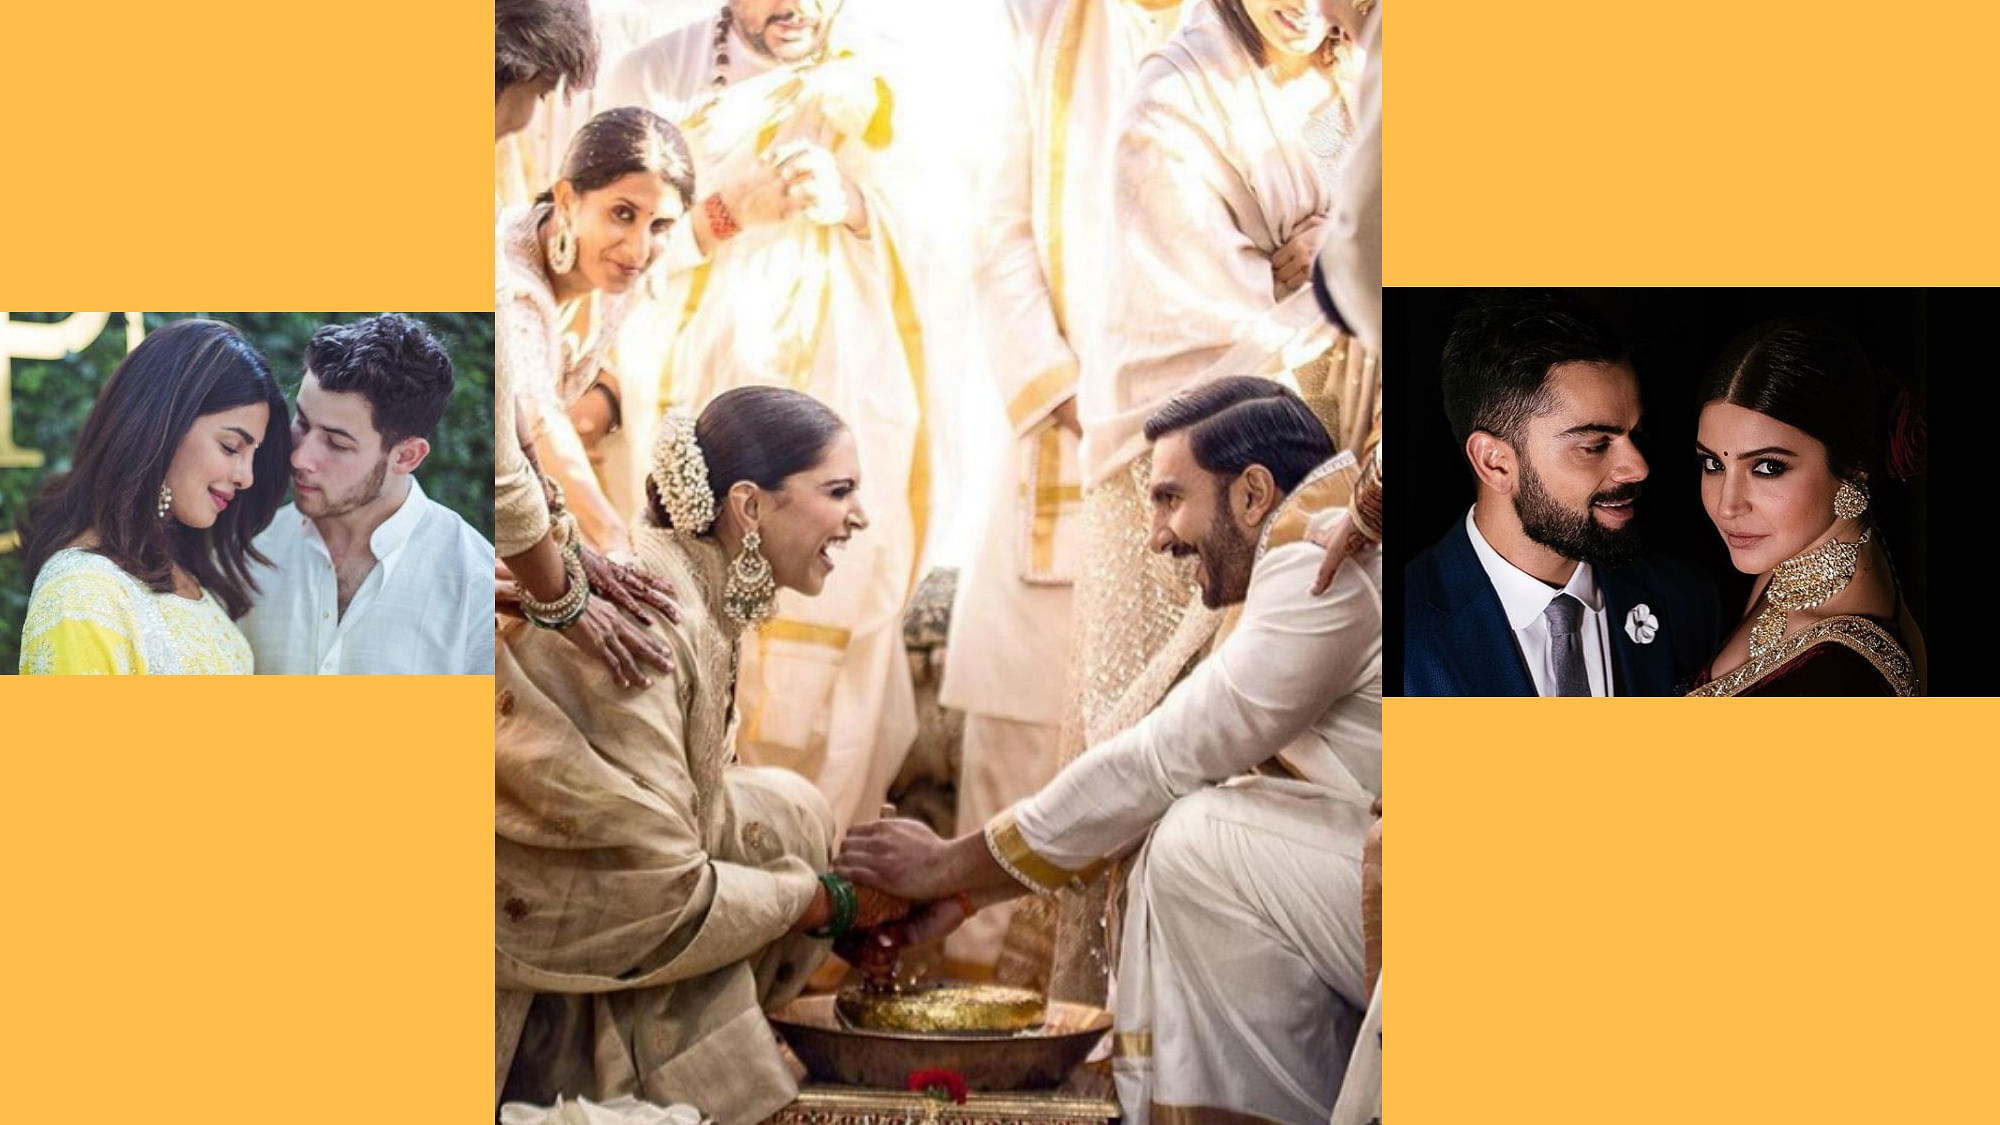 The newest power couple on the block, Deepika and Ranveer are proving to be quite a handful for the Indian media.